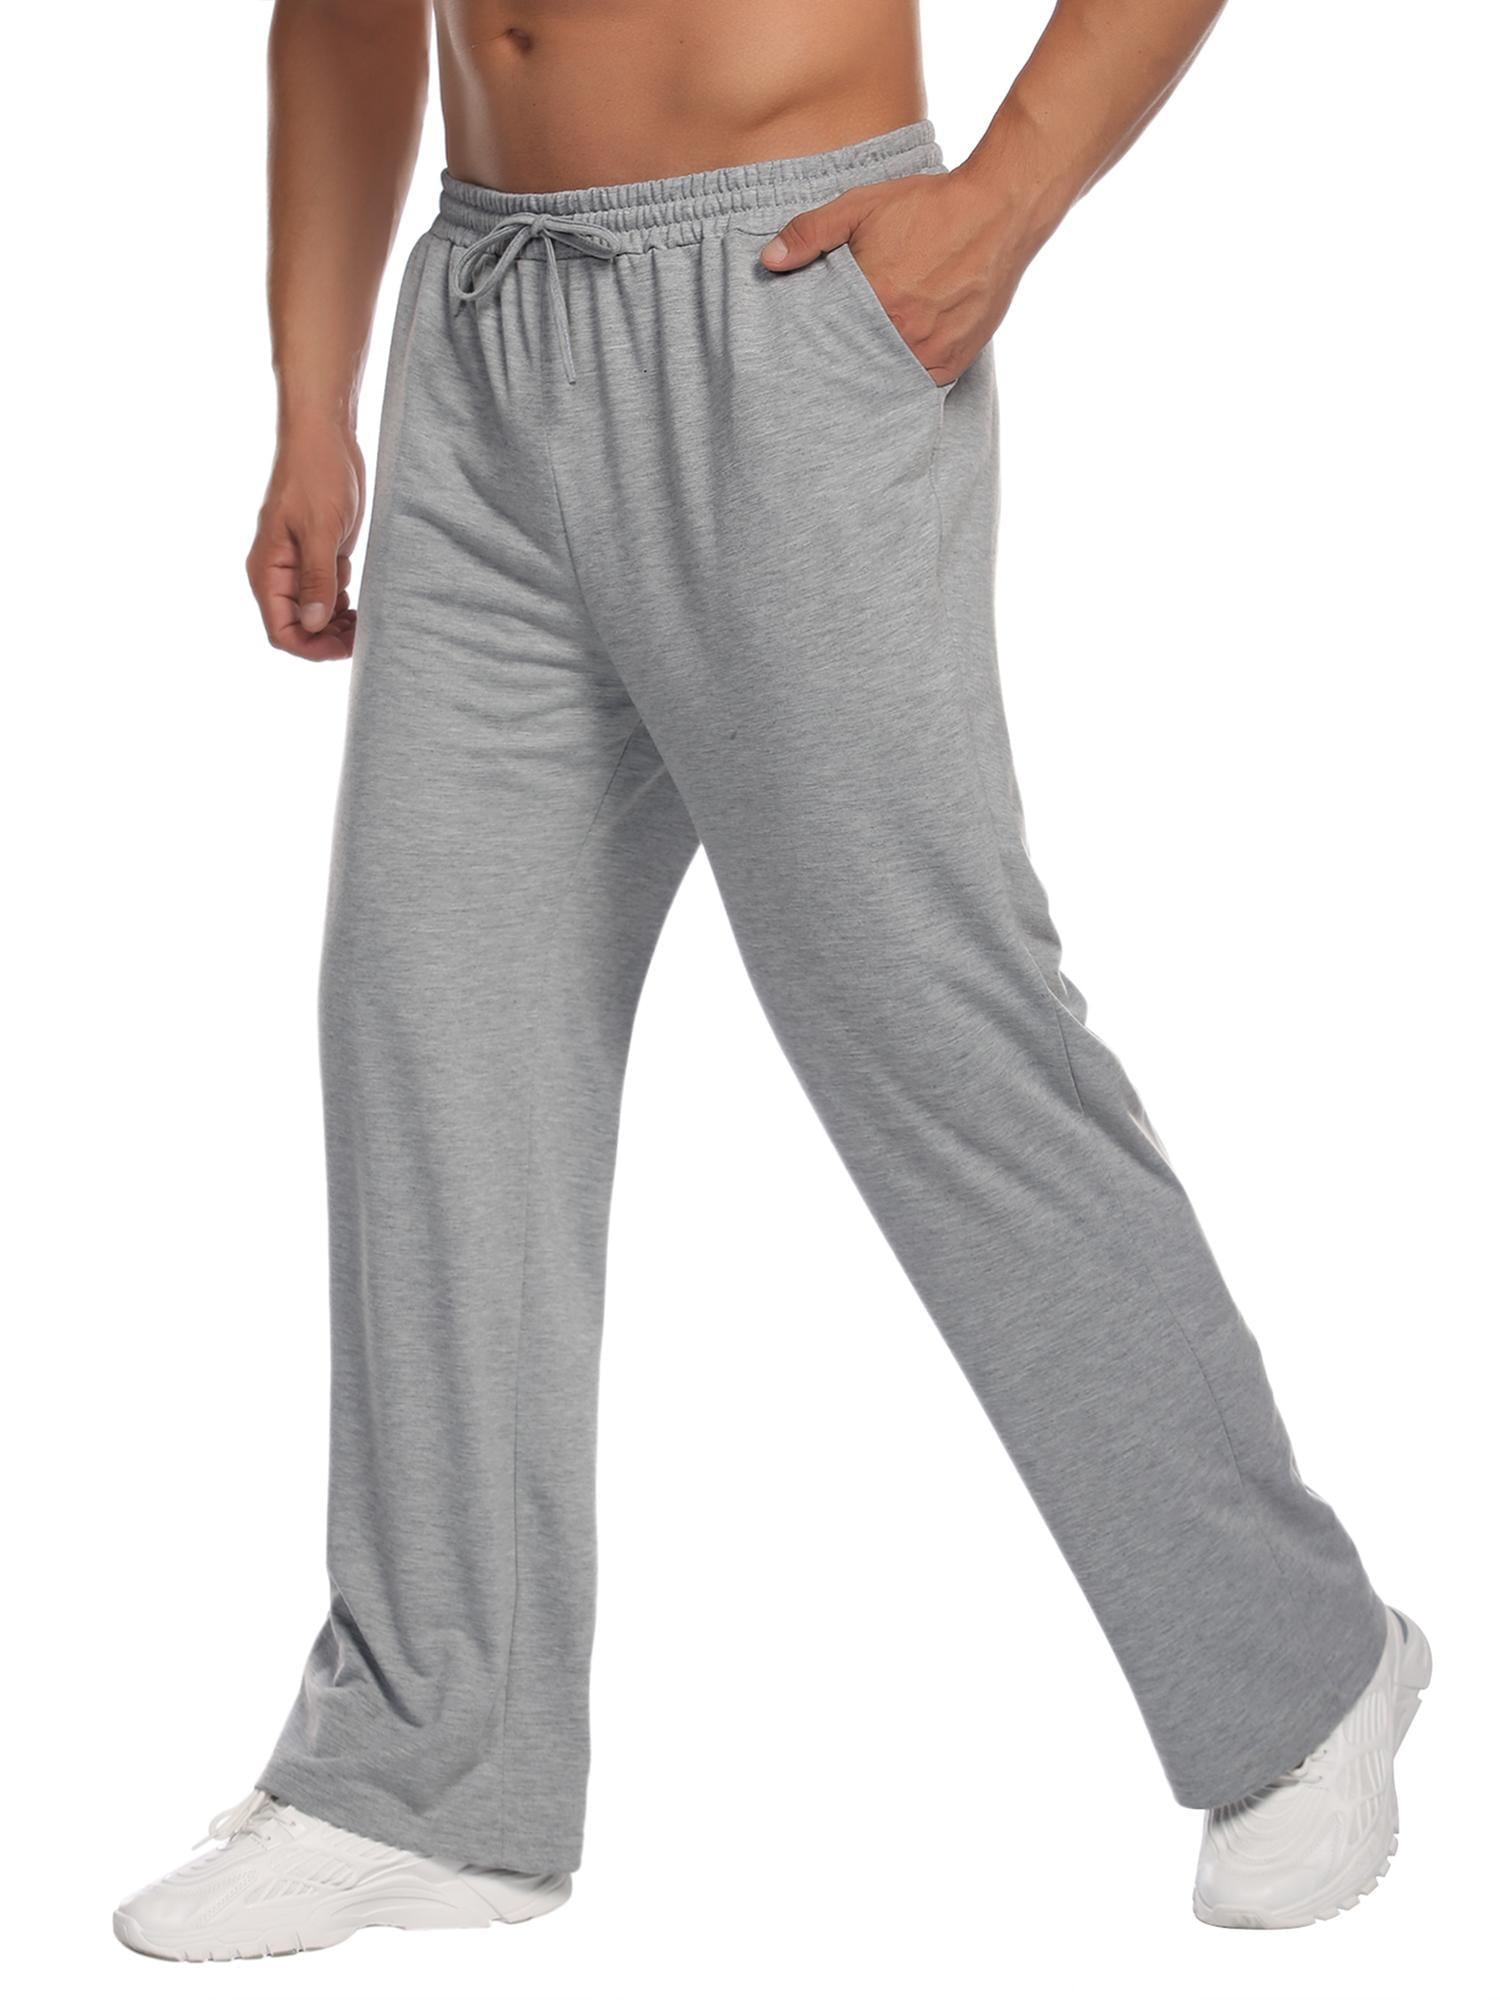 cllios Mens Sweatpants Solid Casual Drawstring Open Bottoms with